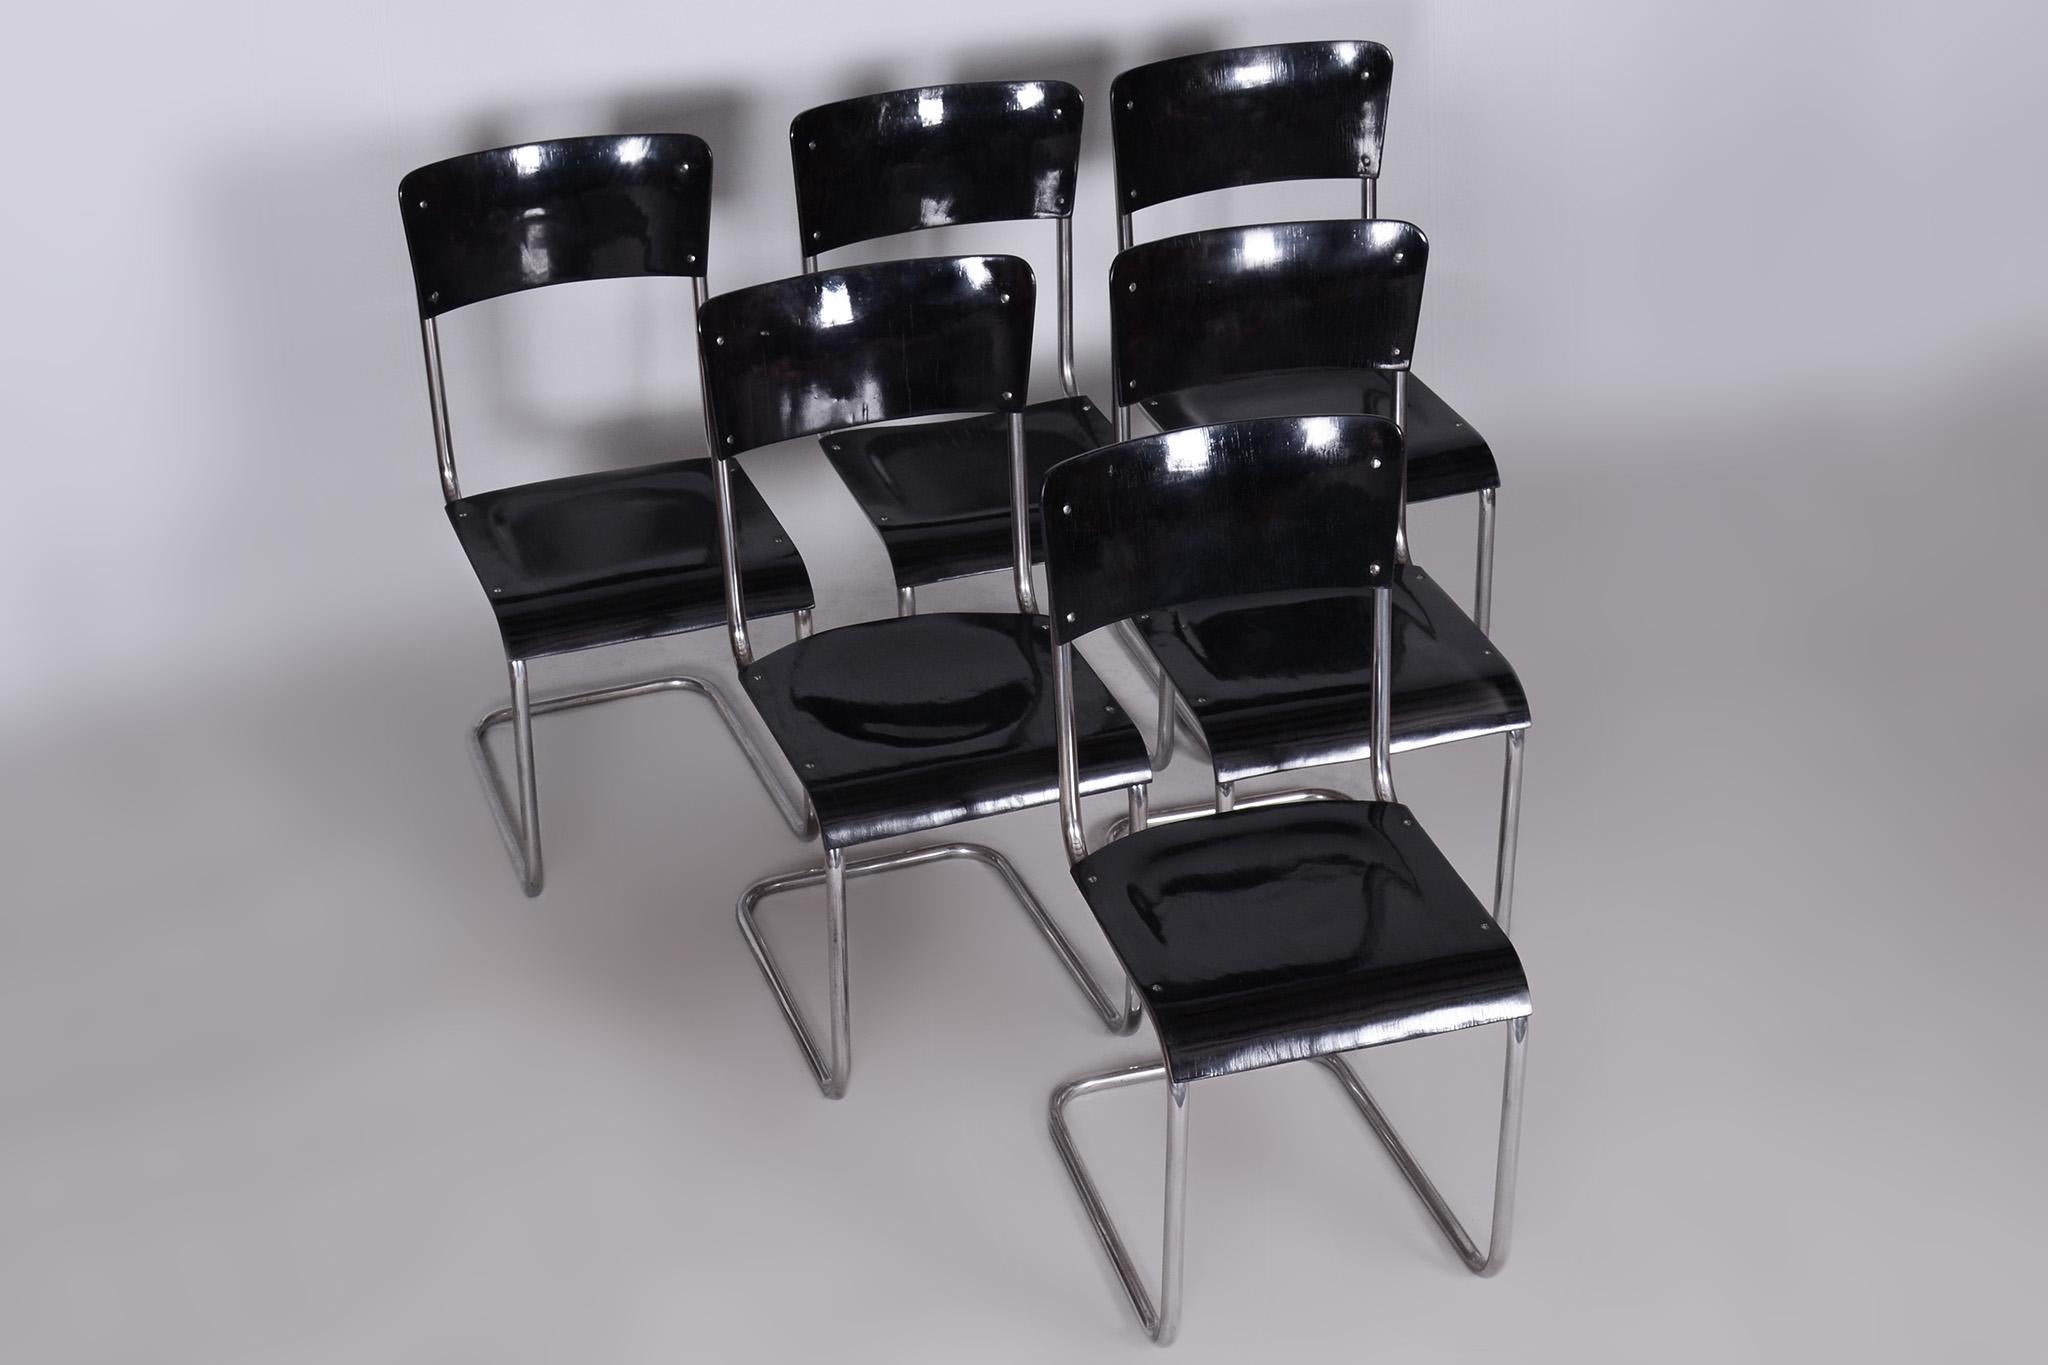 Set of 6 Vintage Bauhaus Chairs, Restored, Gloss, Vichr a Spol, Czechia, 1930s In Good Condition For Sale In Horomerice, CZ